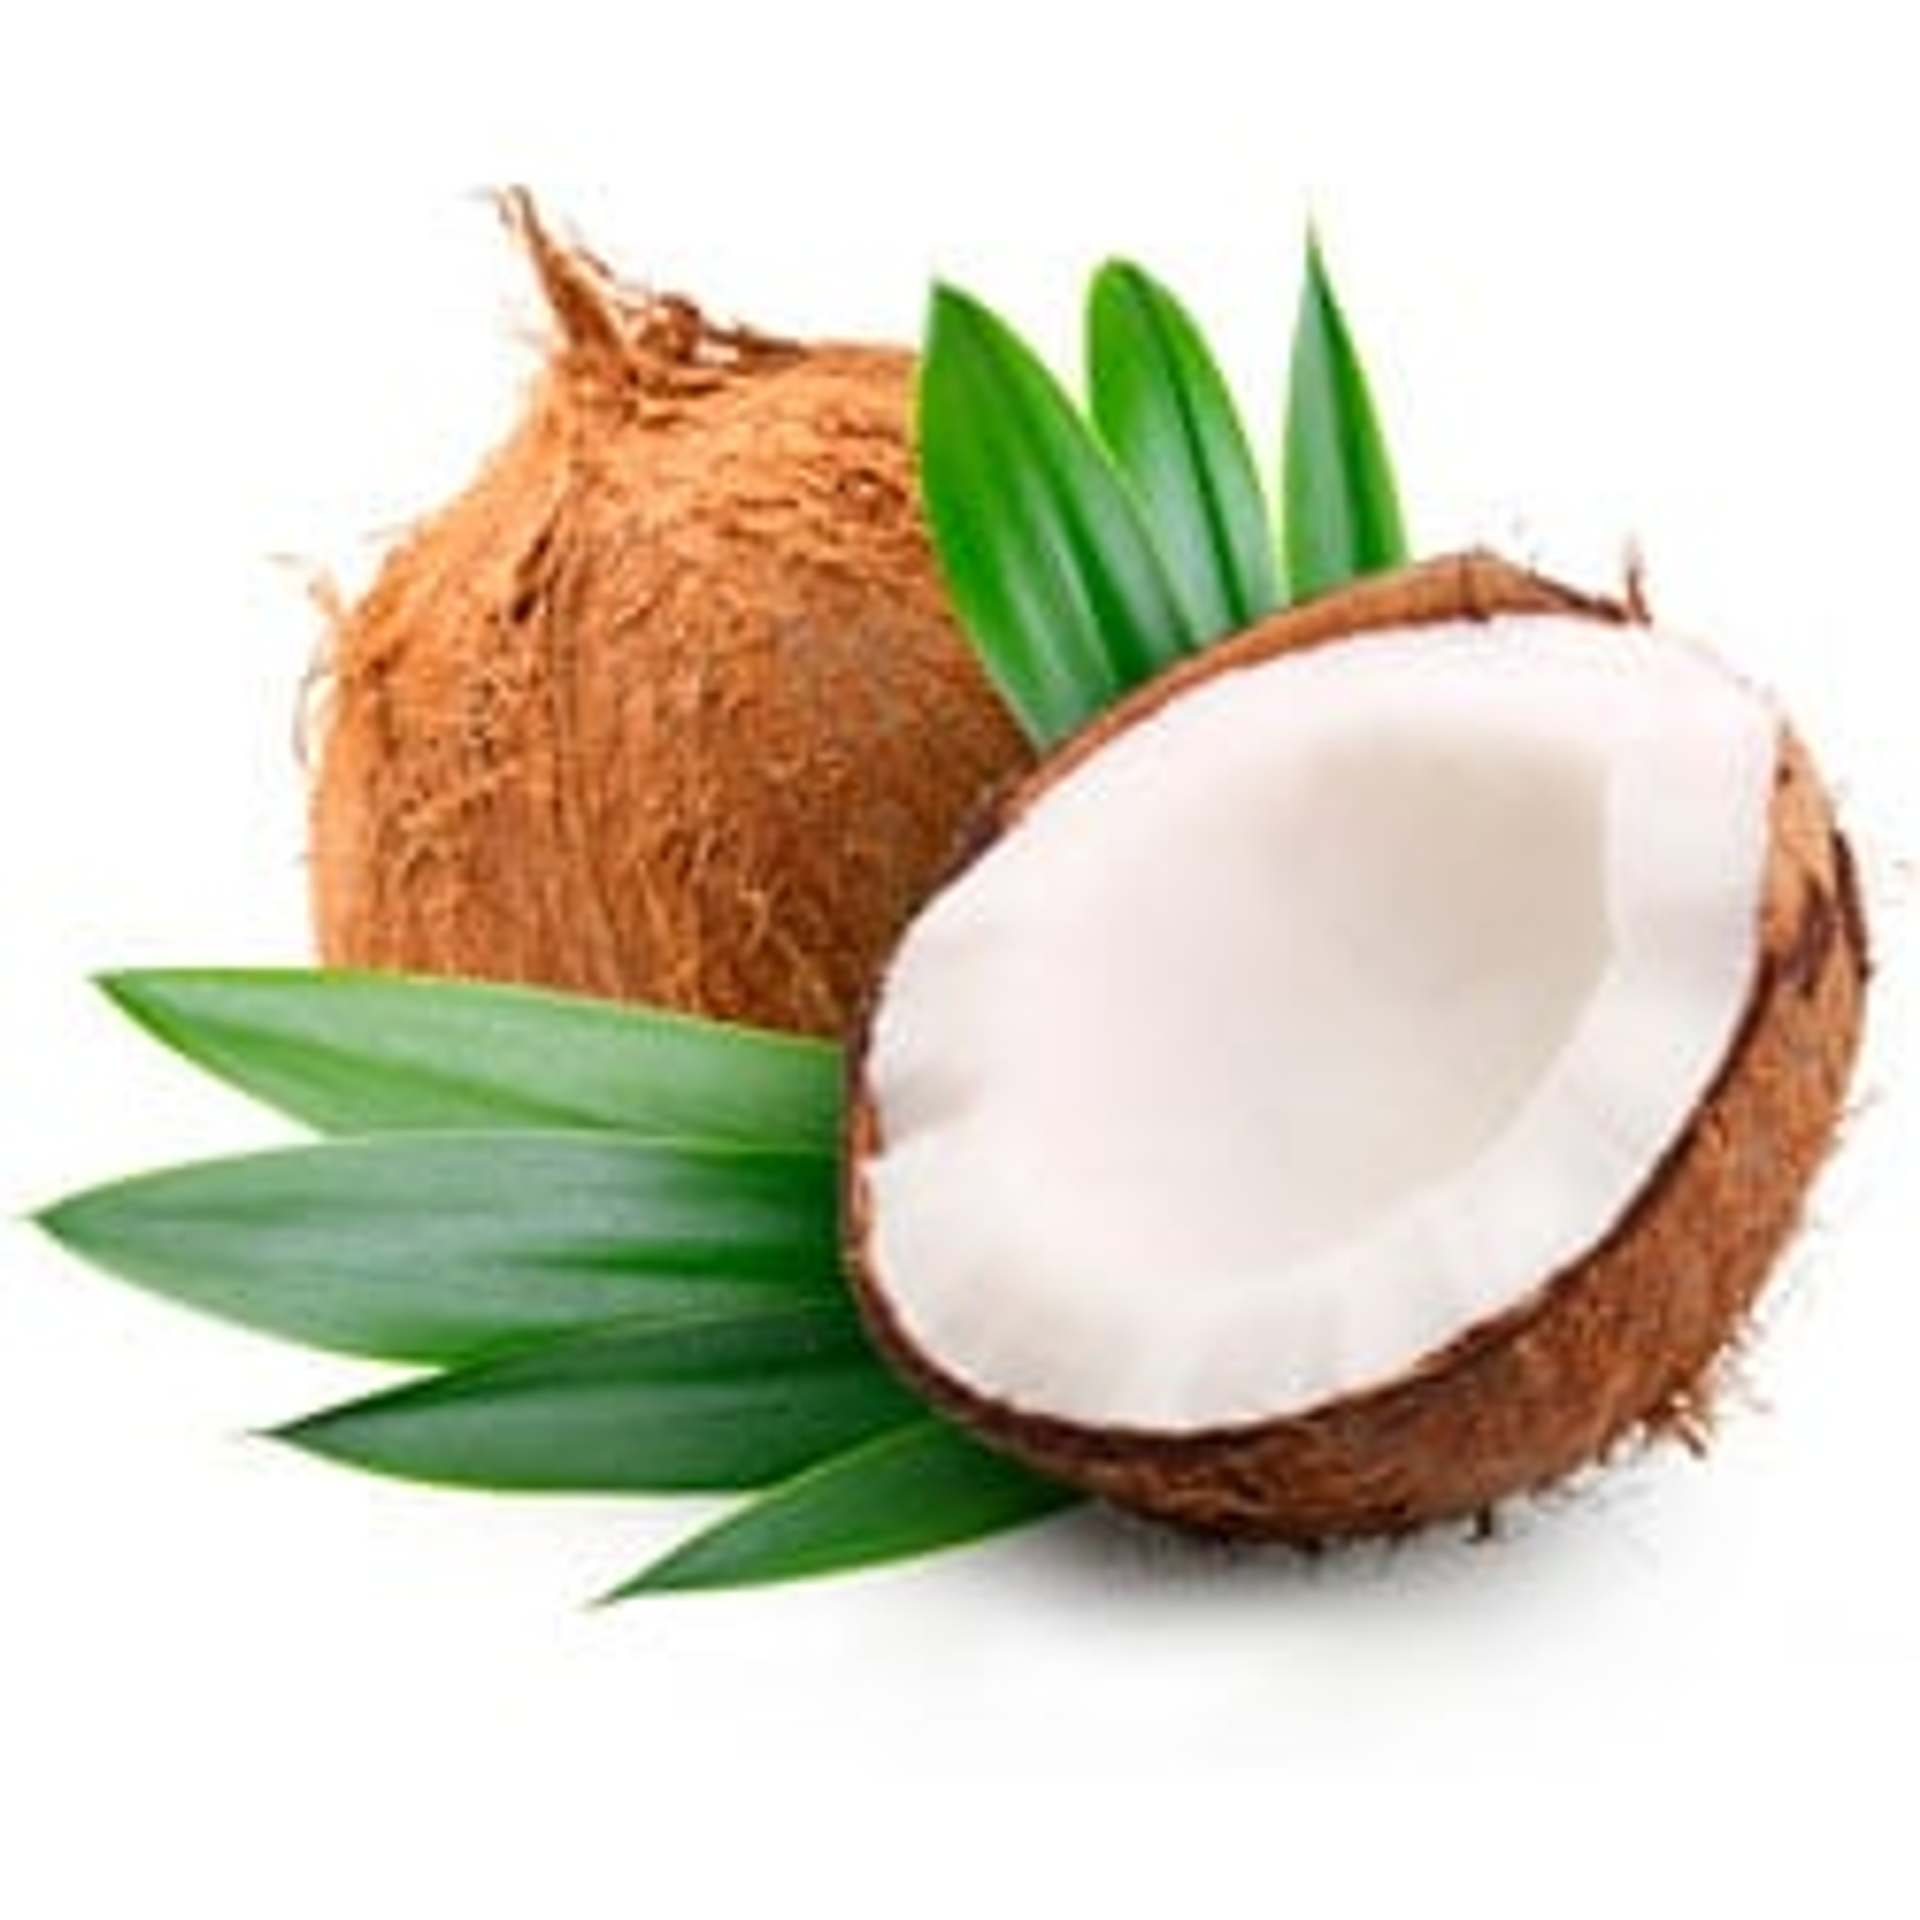 Coconut oil is a great alternative to other fats when cooking food and at the same time supplies beneficial saturated fatty acids.